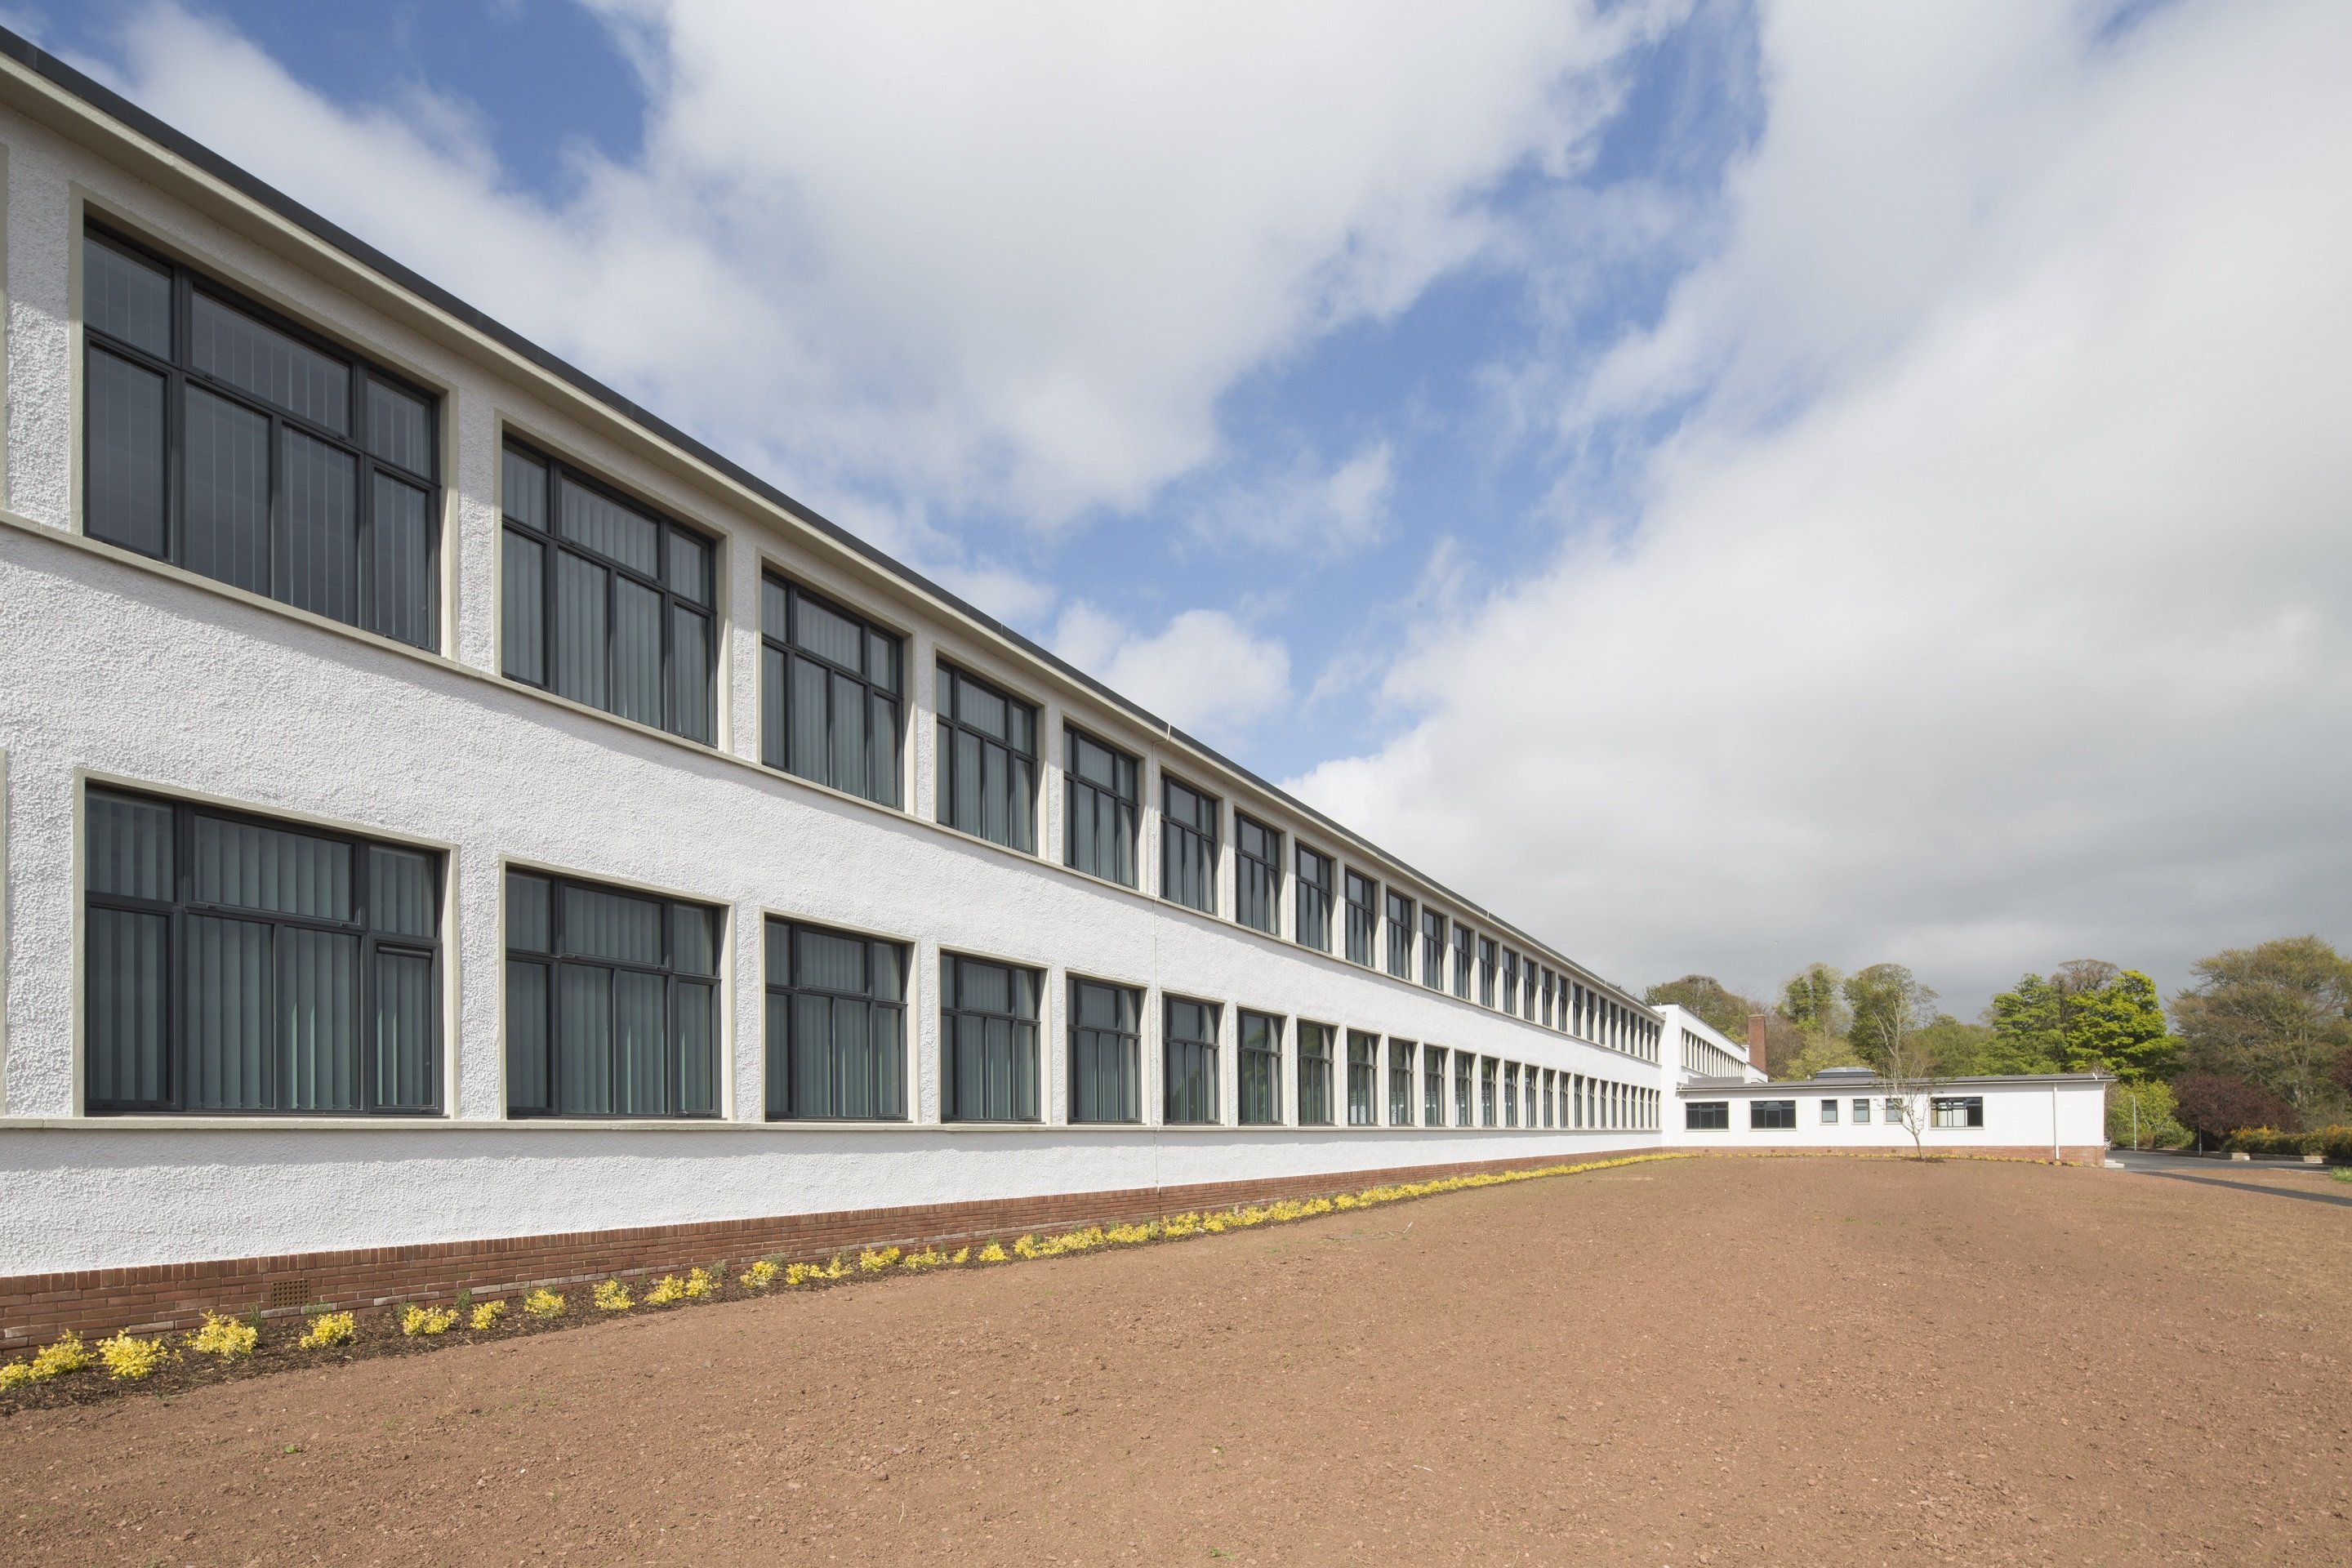 CMS completes project on new Scottish primary school